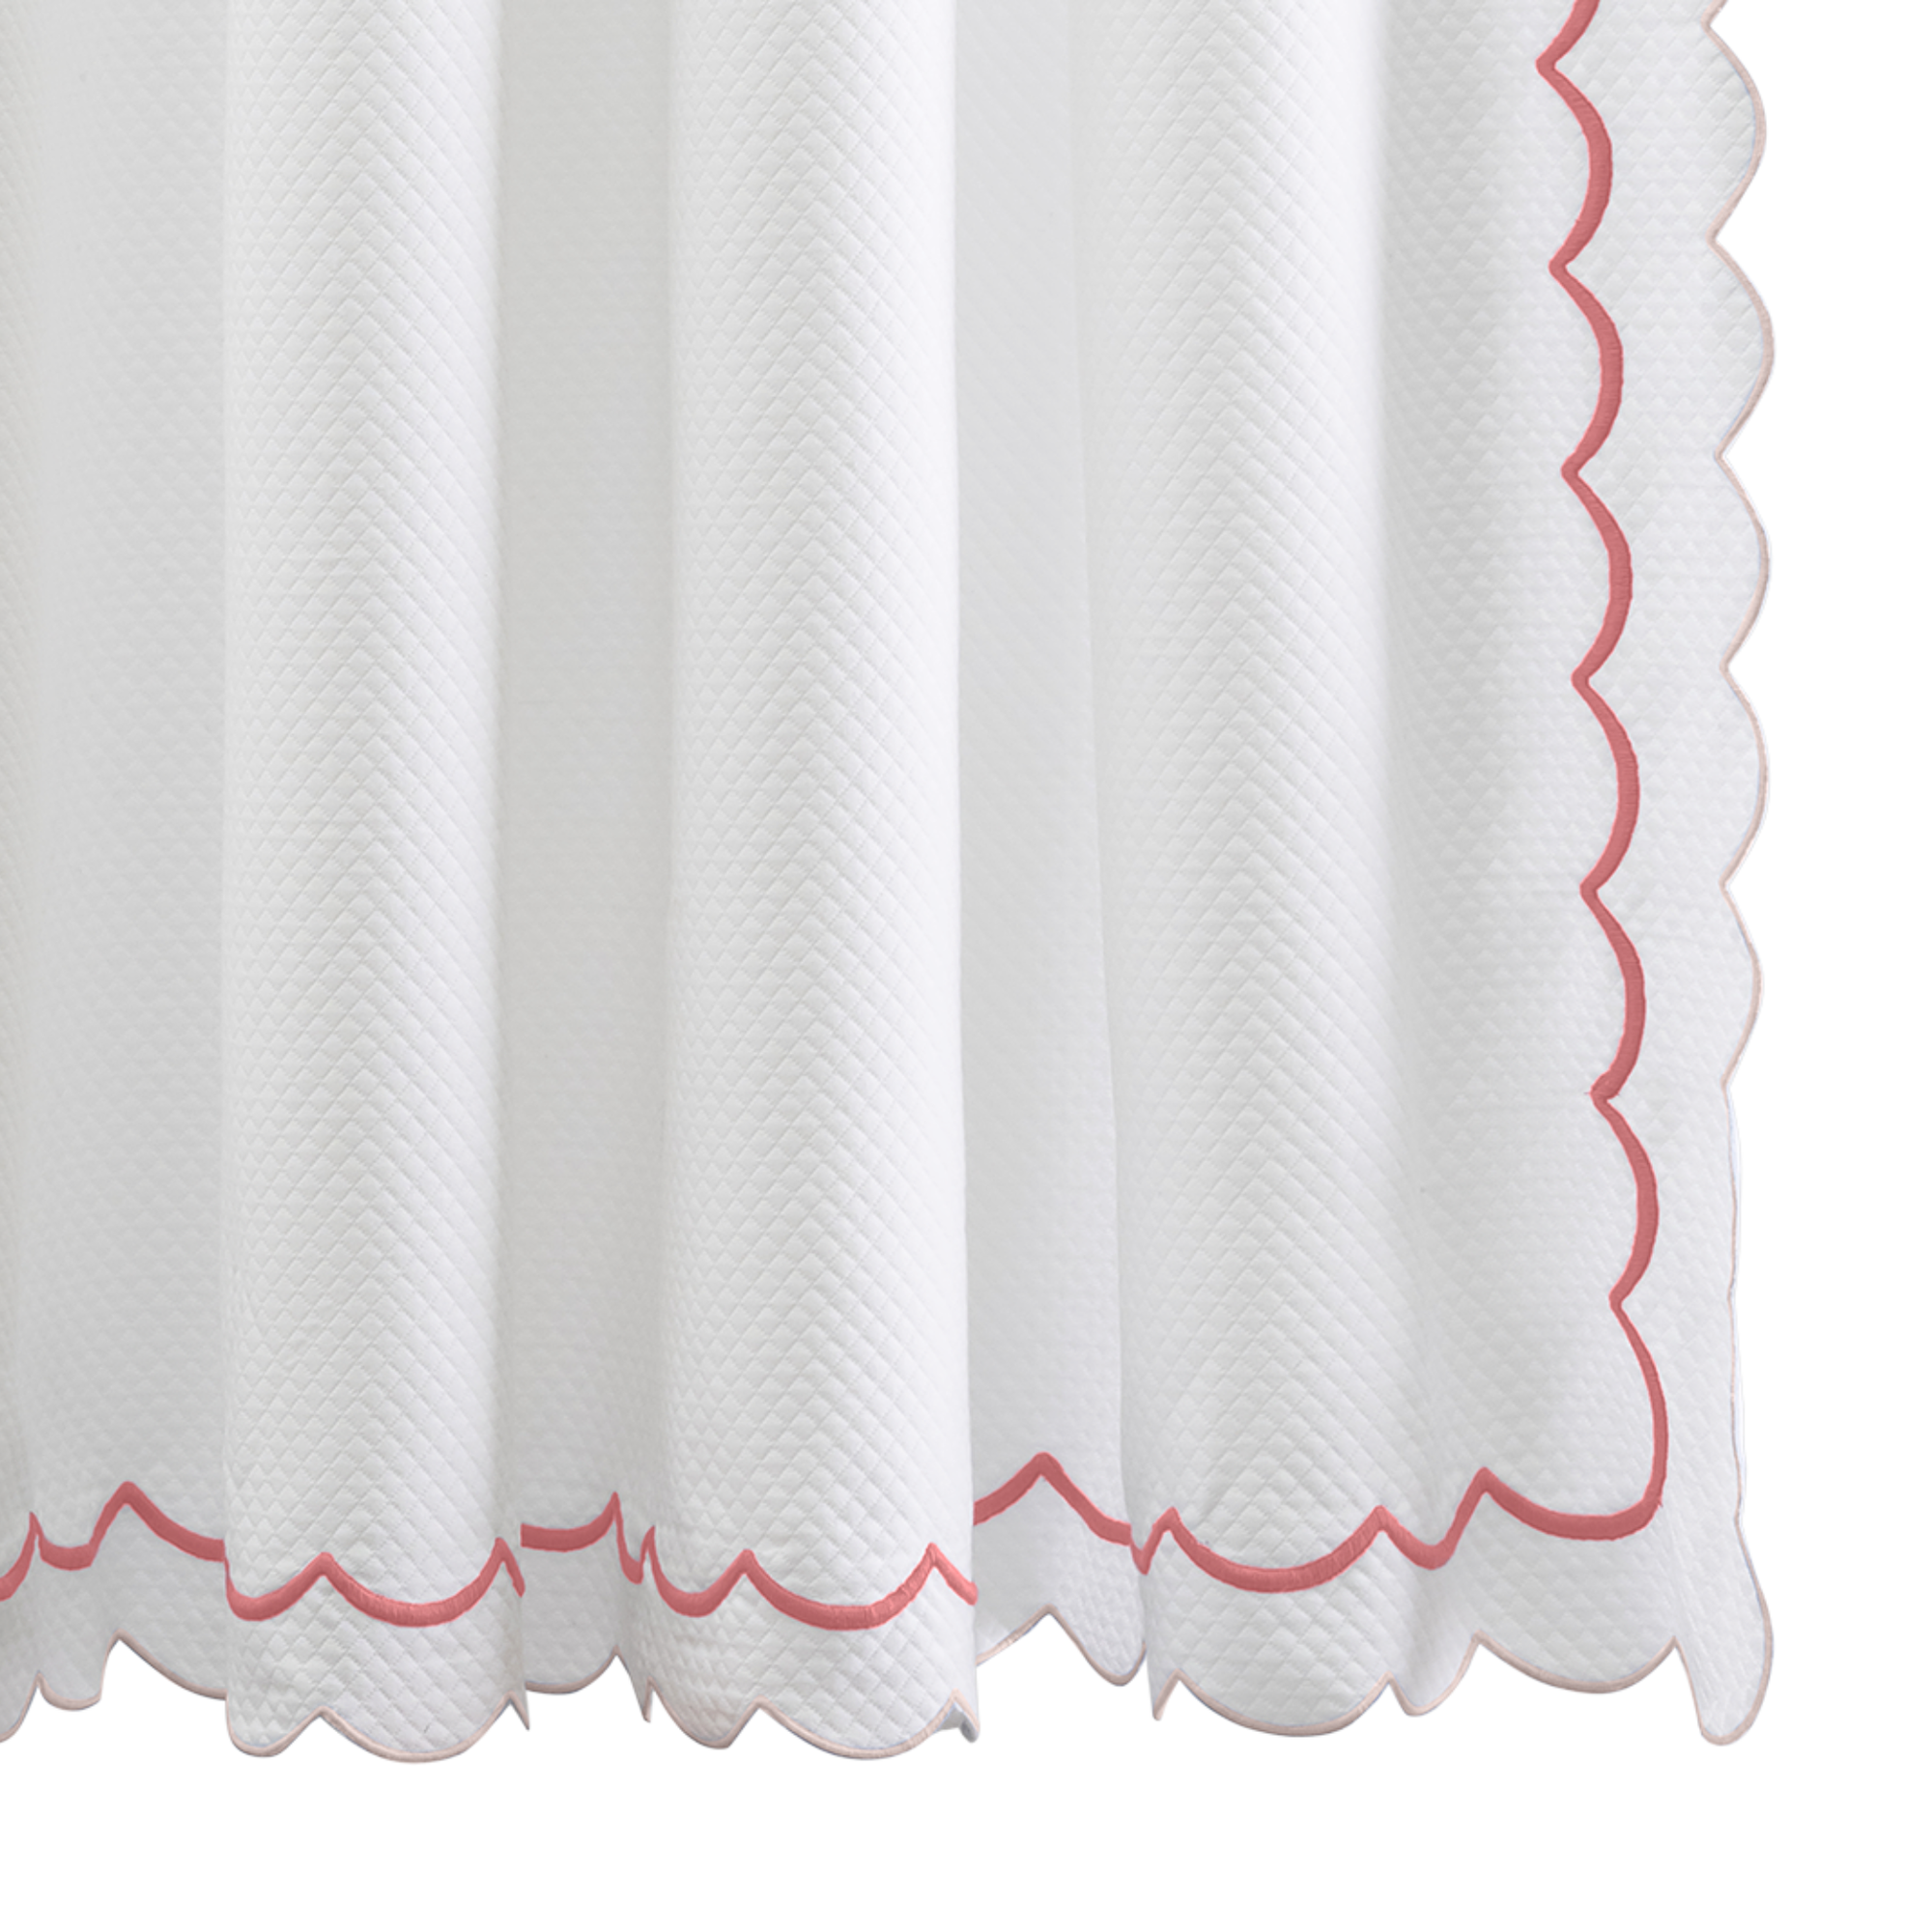 Hanging Edges of Matouk Indie Pique Shower Curtain in Blush Color